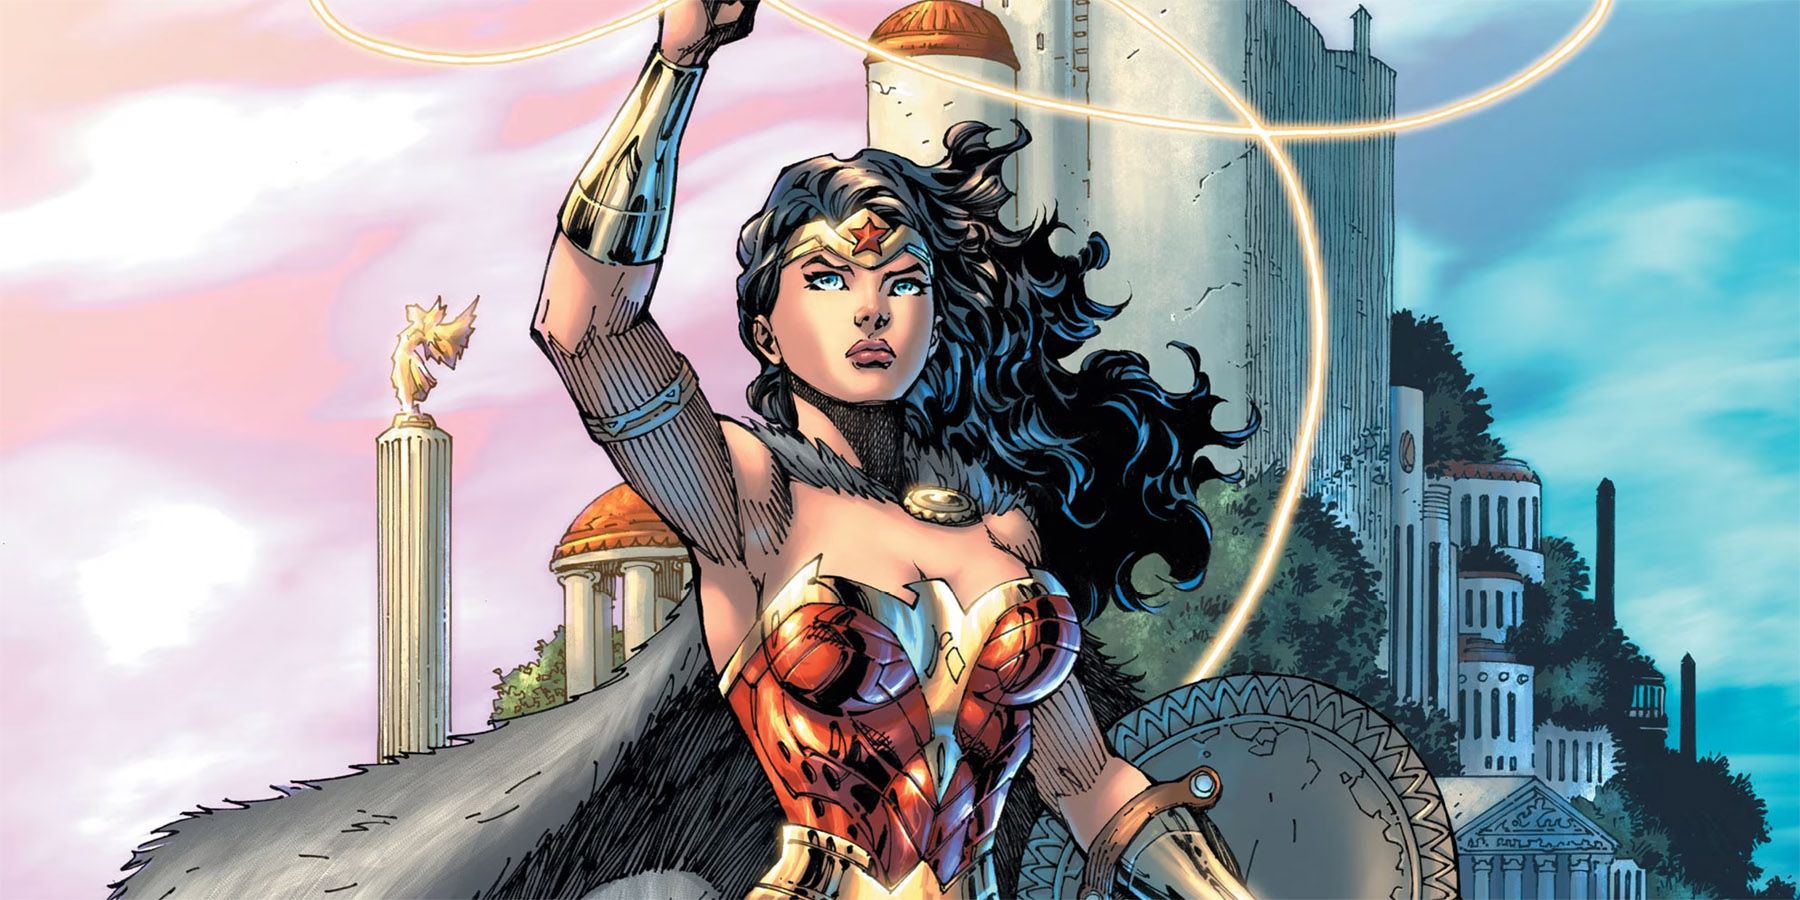 Dawn of DC's Wonder Woman #1 Gets Second Printing Days After its Release